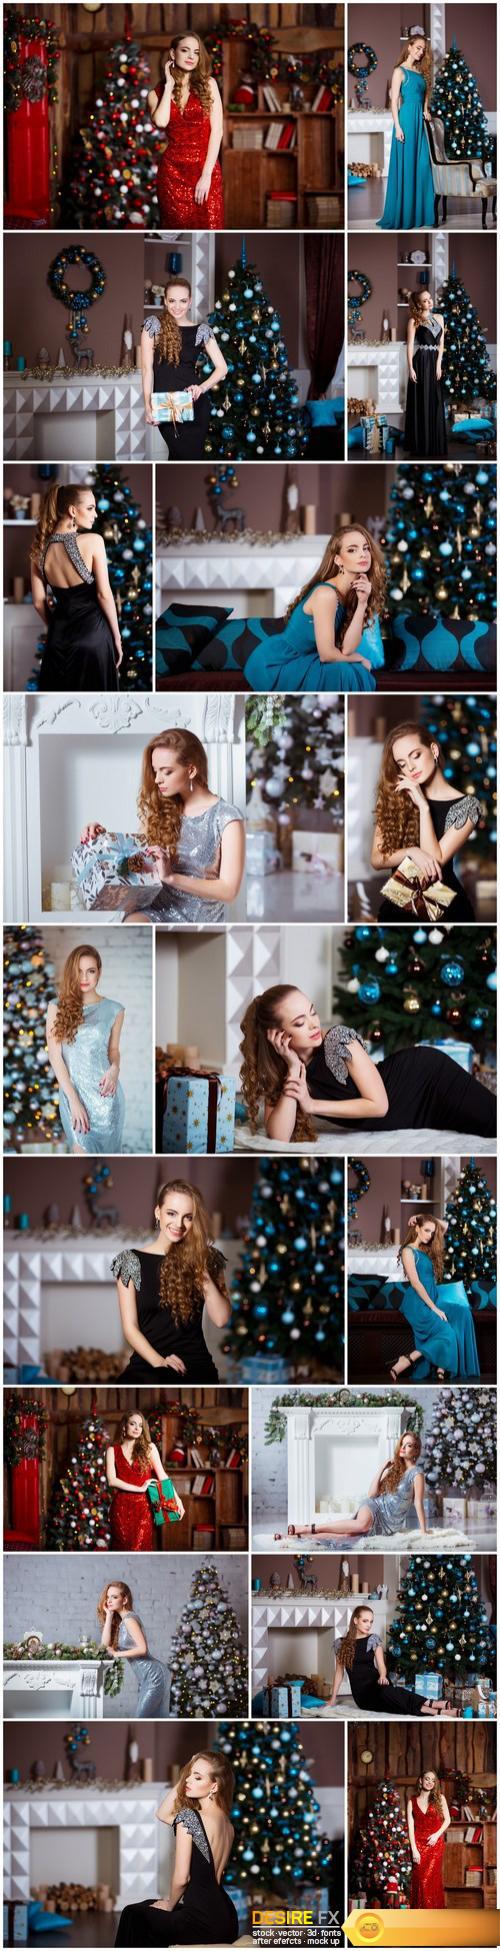 Young woman in elegant dress over christmas interior background – 18xUHQ JPEG